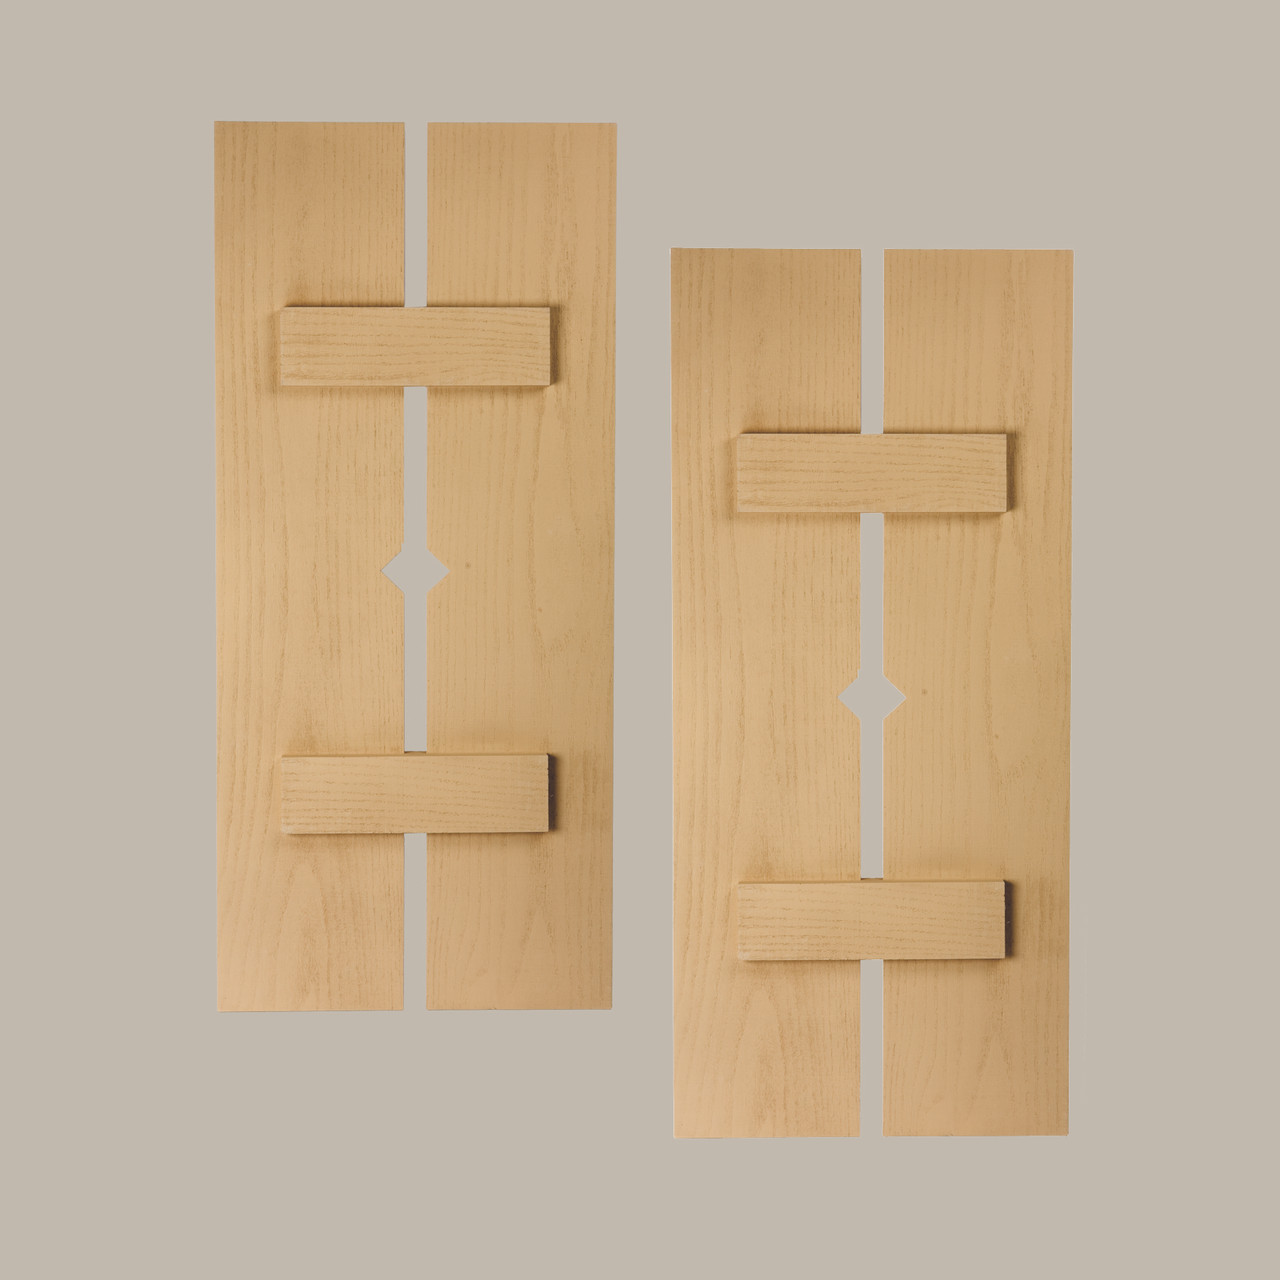 12 inch by 85 inch Plank Shutter with 2-Plank, Diamond